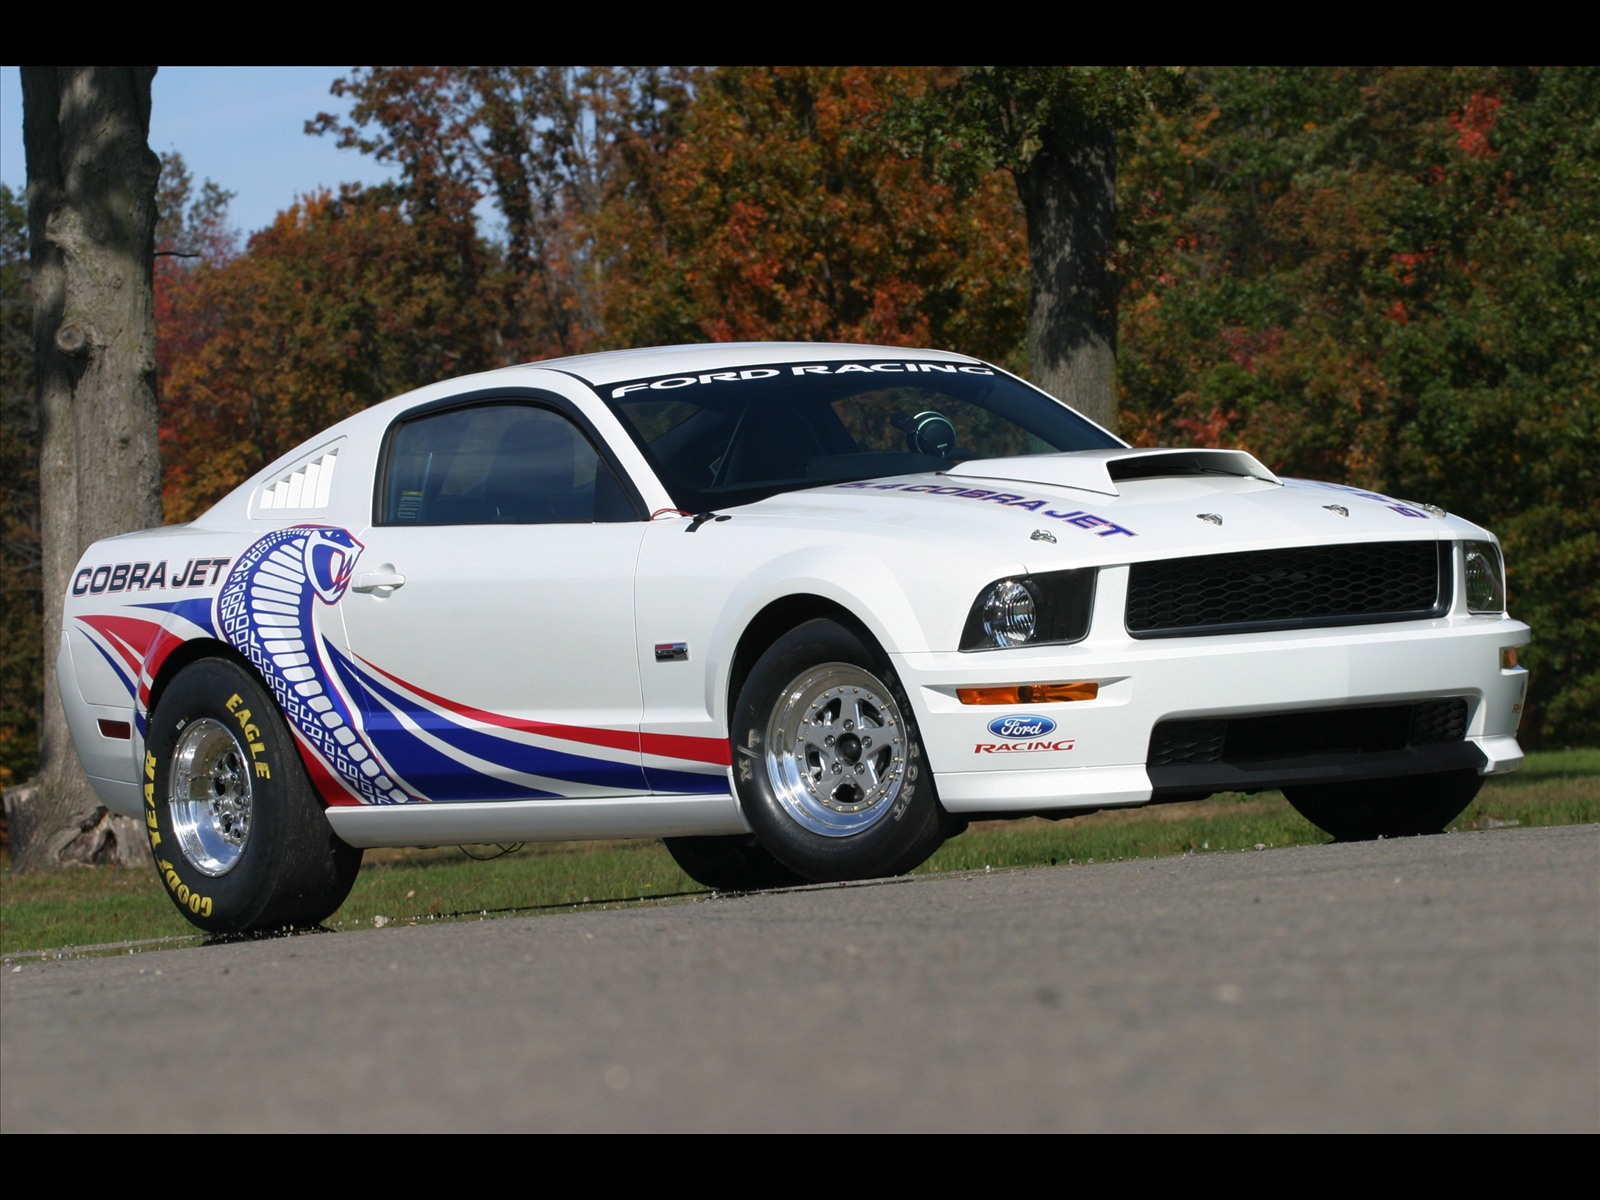 Super Cobra Jet Ford Mustang Mach 1 Rescued From Storage - Design Corral